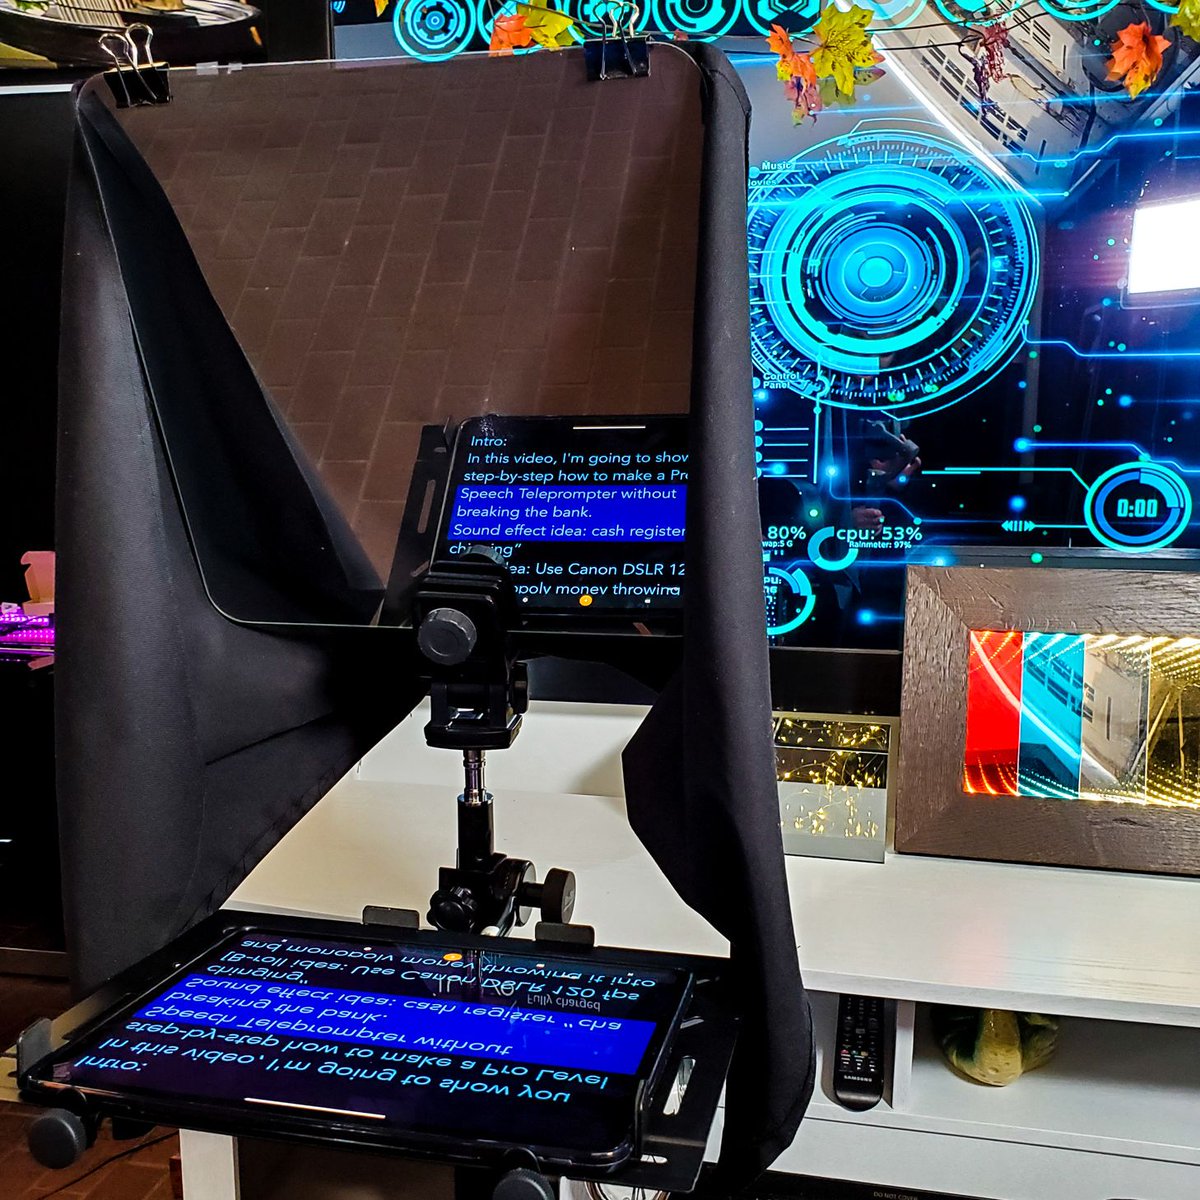 Teleprompter Tip: If you are having a hard time reading off the script by constantly stuttering or saying the wrong words, just take the time to get practice, get familiar with your script and also slow down when reading. #teleprompter #telepromptertips